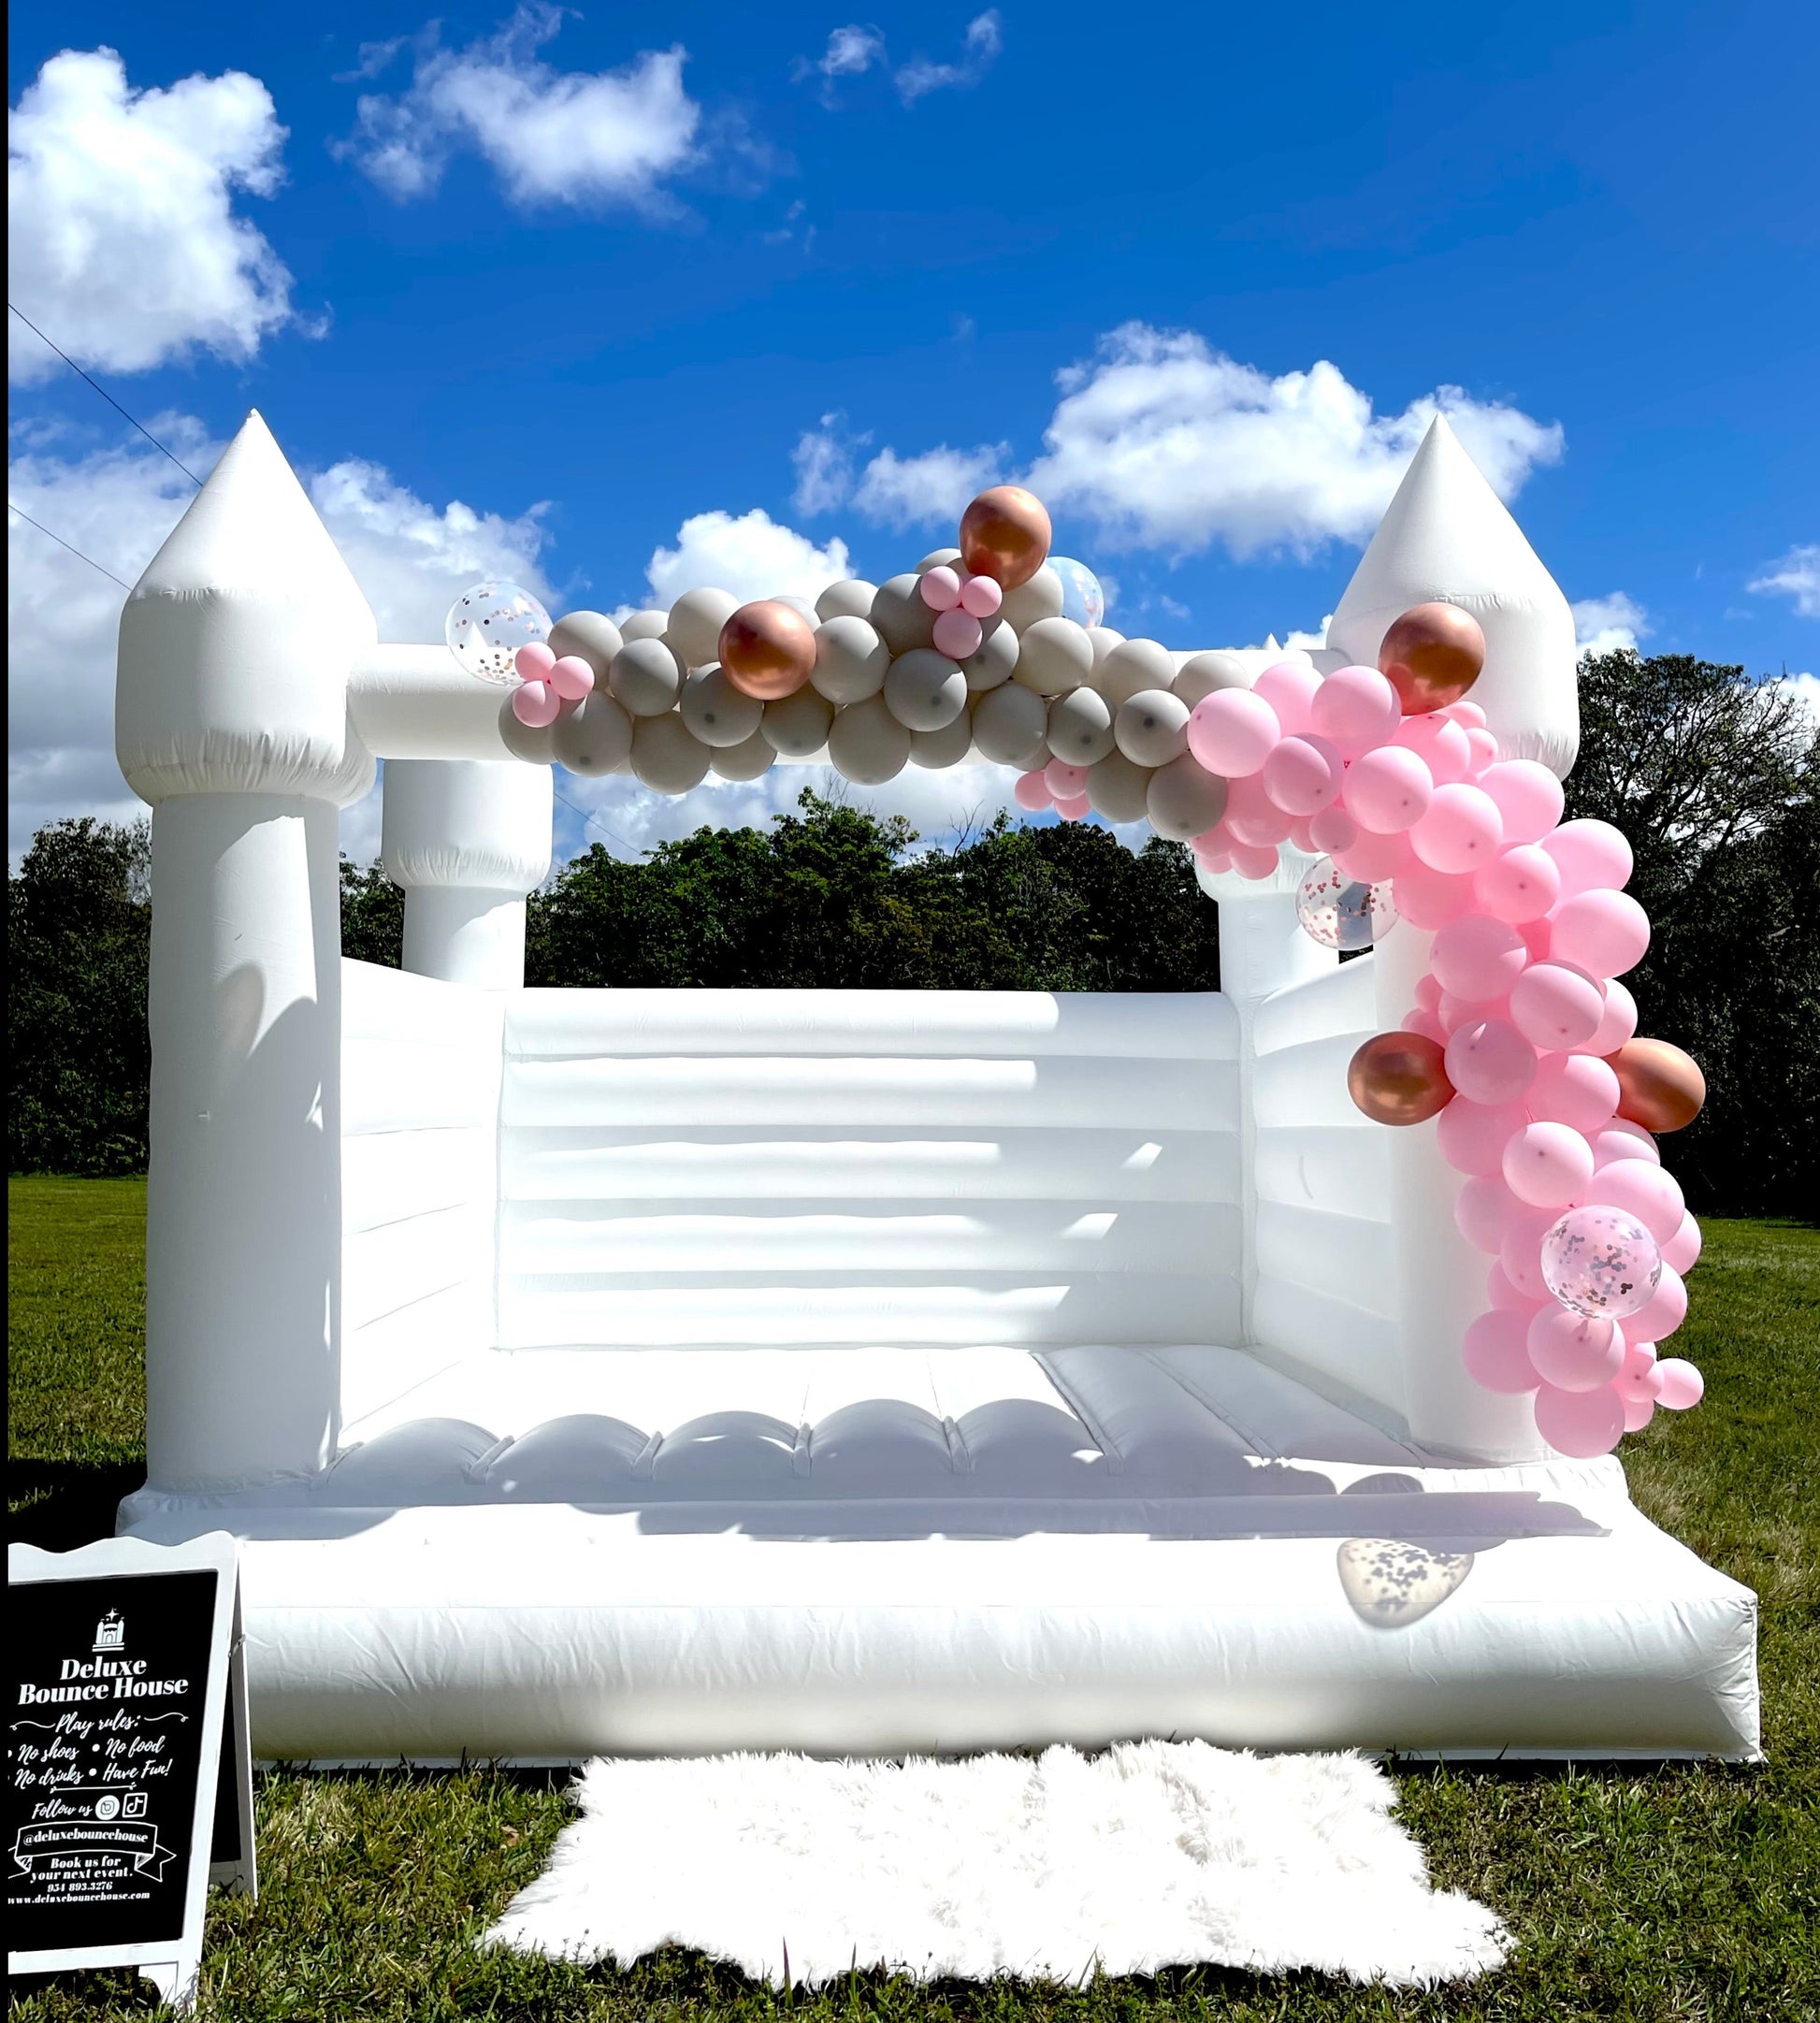 White Bounce House for rent, bounce house decor, ballon garland decor, free delivery miami dade and broward county, beautiful bounce house, castle bounce house, party decor